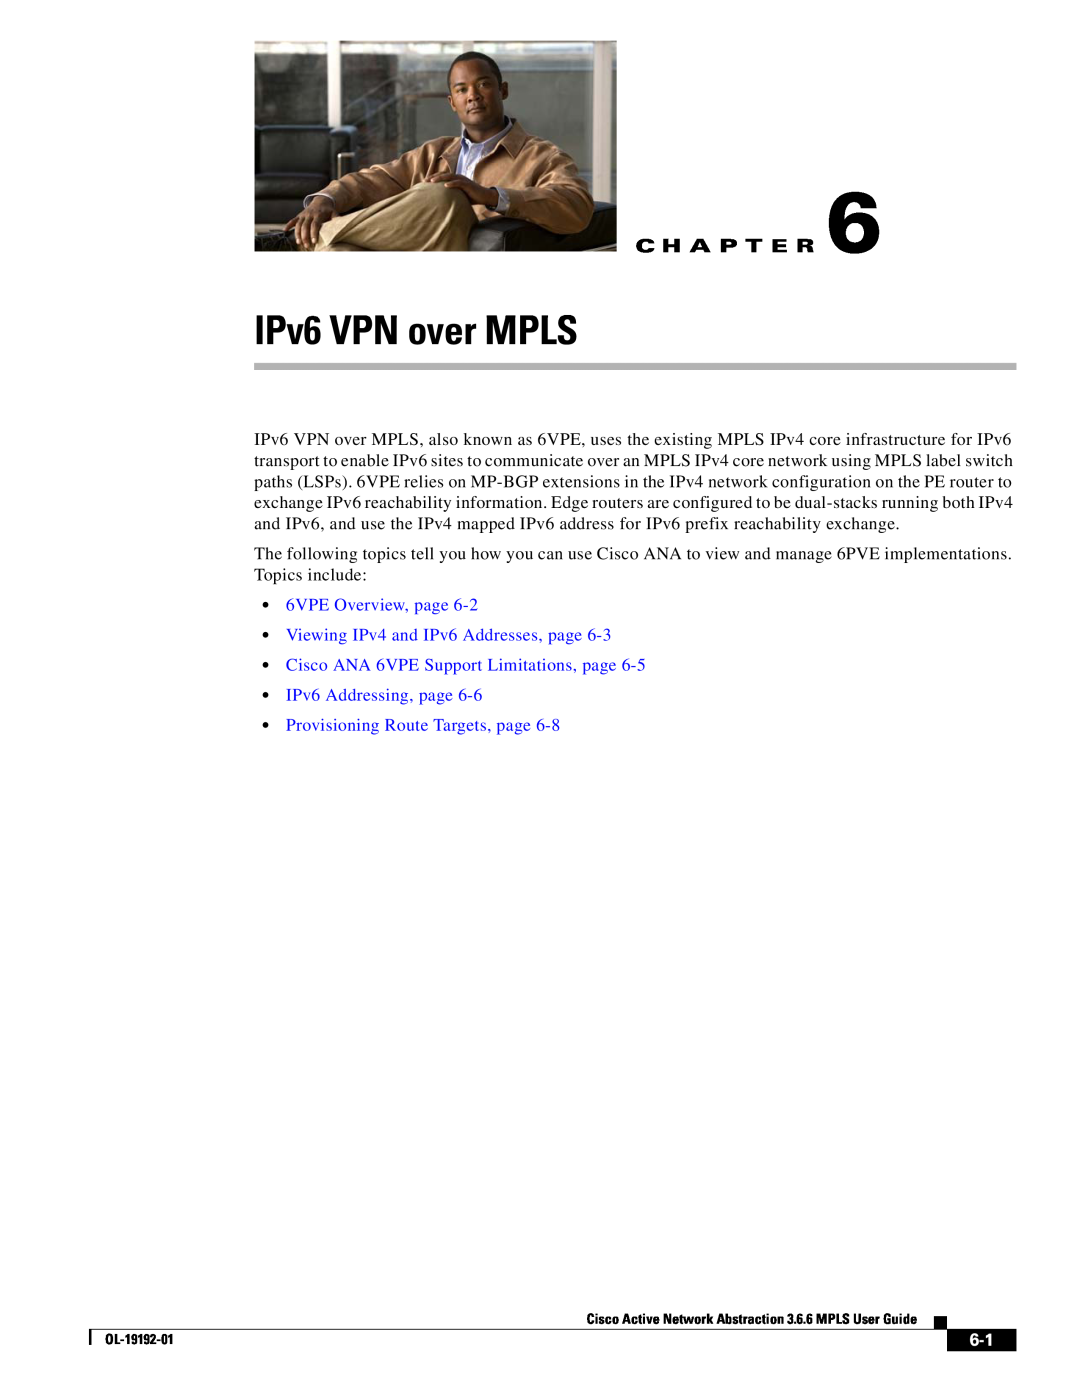 Cisco Systems 3.6.6 manual IPv6 VPN over MPLS, 6VPE Overview, page Viewing IPv4 and IPv6 Addresses, page, C H A P T E R 